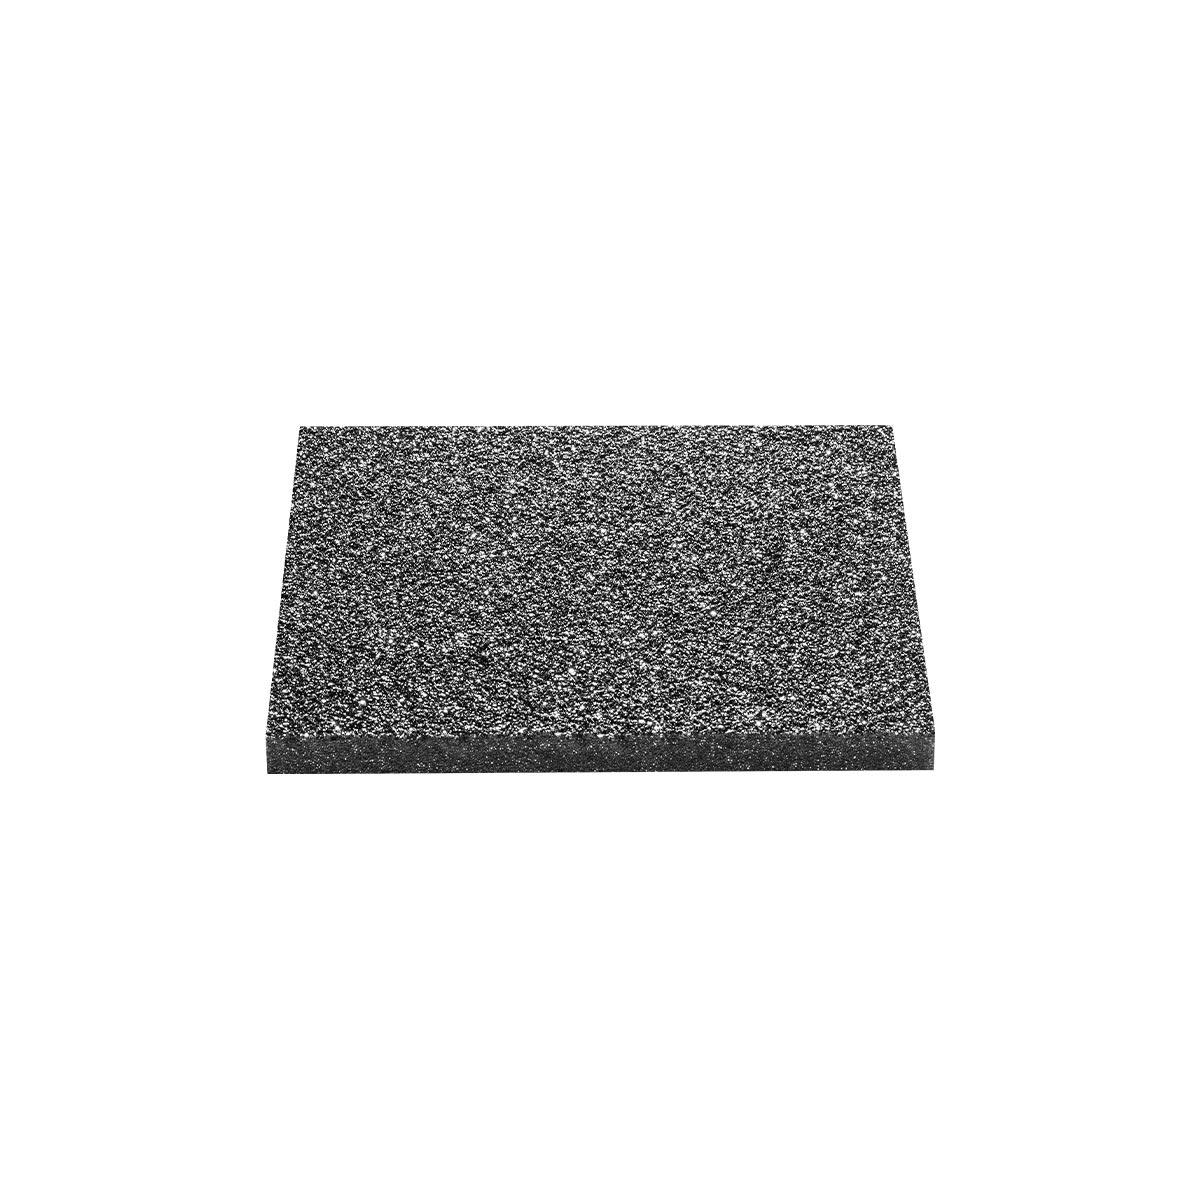 SANDING PADS - PACK OF 3